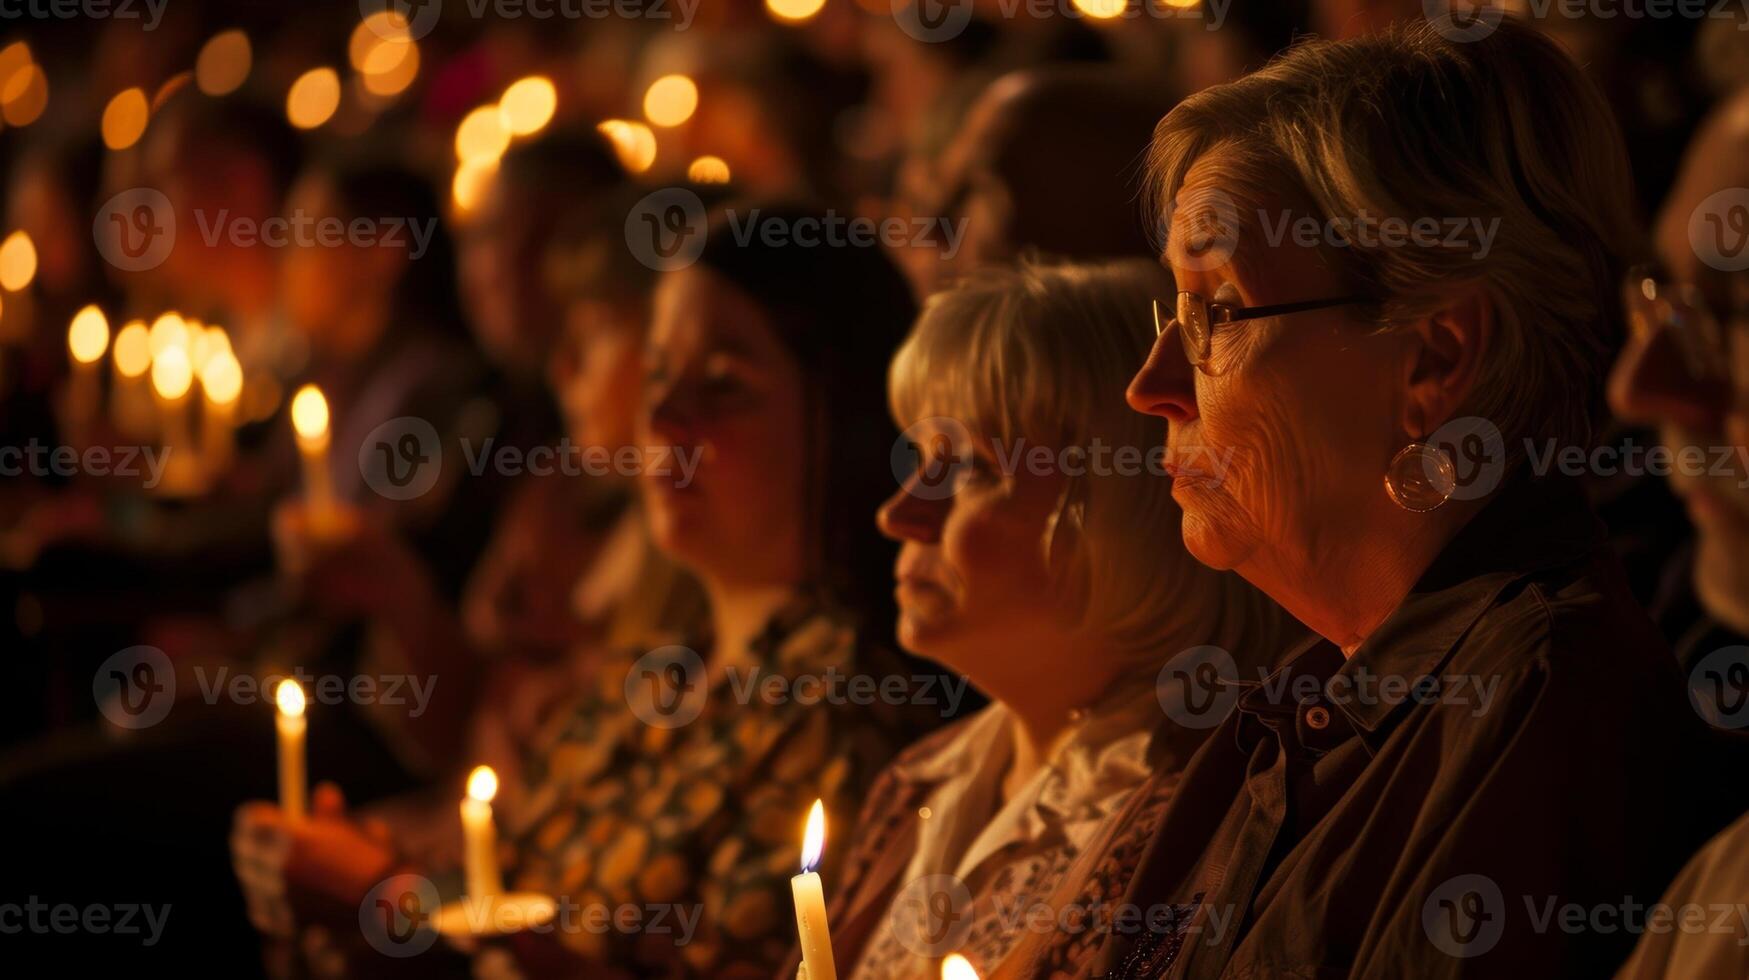 Each audience member holds a candle adding to the enchanting atmosphere of the event. 2d flat cartoon photo